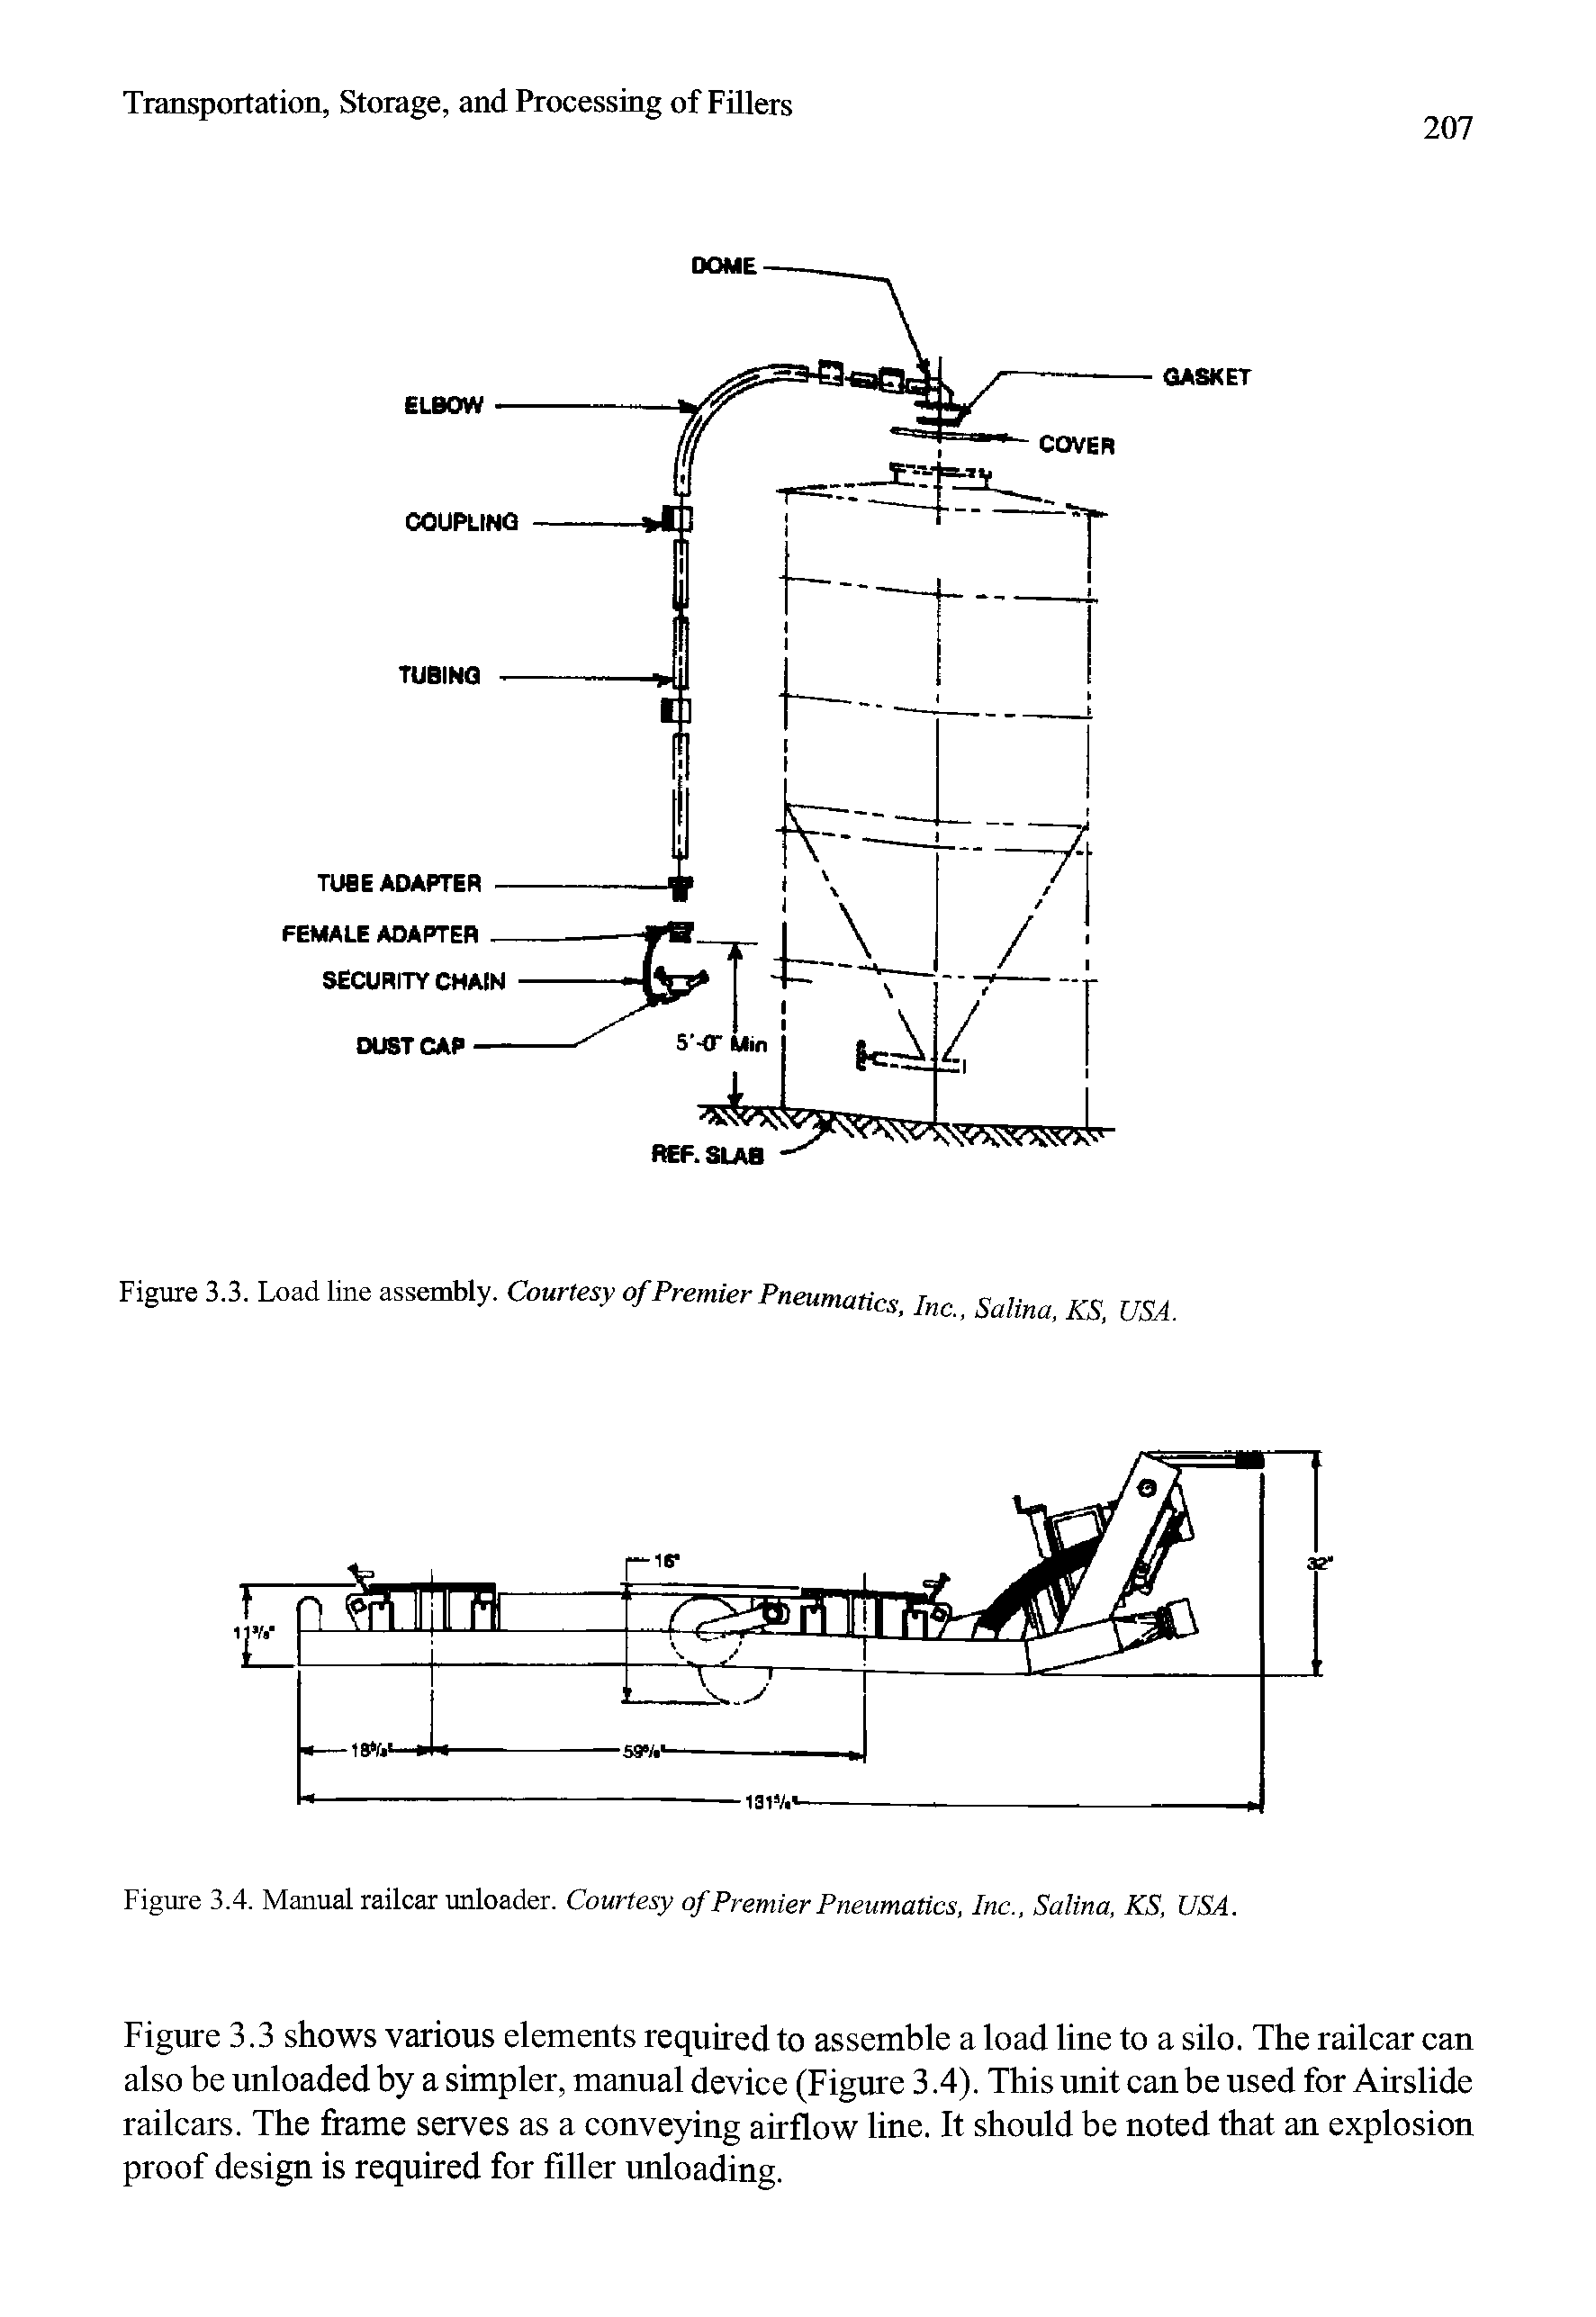 Figure 3.3 shows various elements required to assemble a load line to a silo. The railearcan also be unloaded by a simpler, manual device (Figure 3.4). This unit can be used for Airslide railcars. The frame serves as a conveying airflow line. It should be noted that an explosion proof design is required for filler unloading.